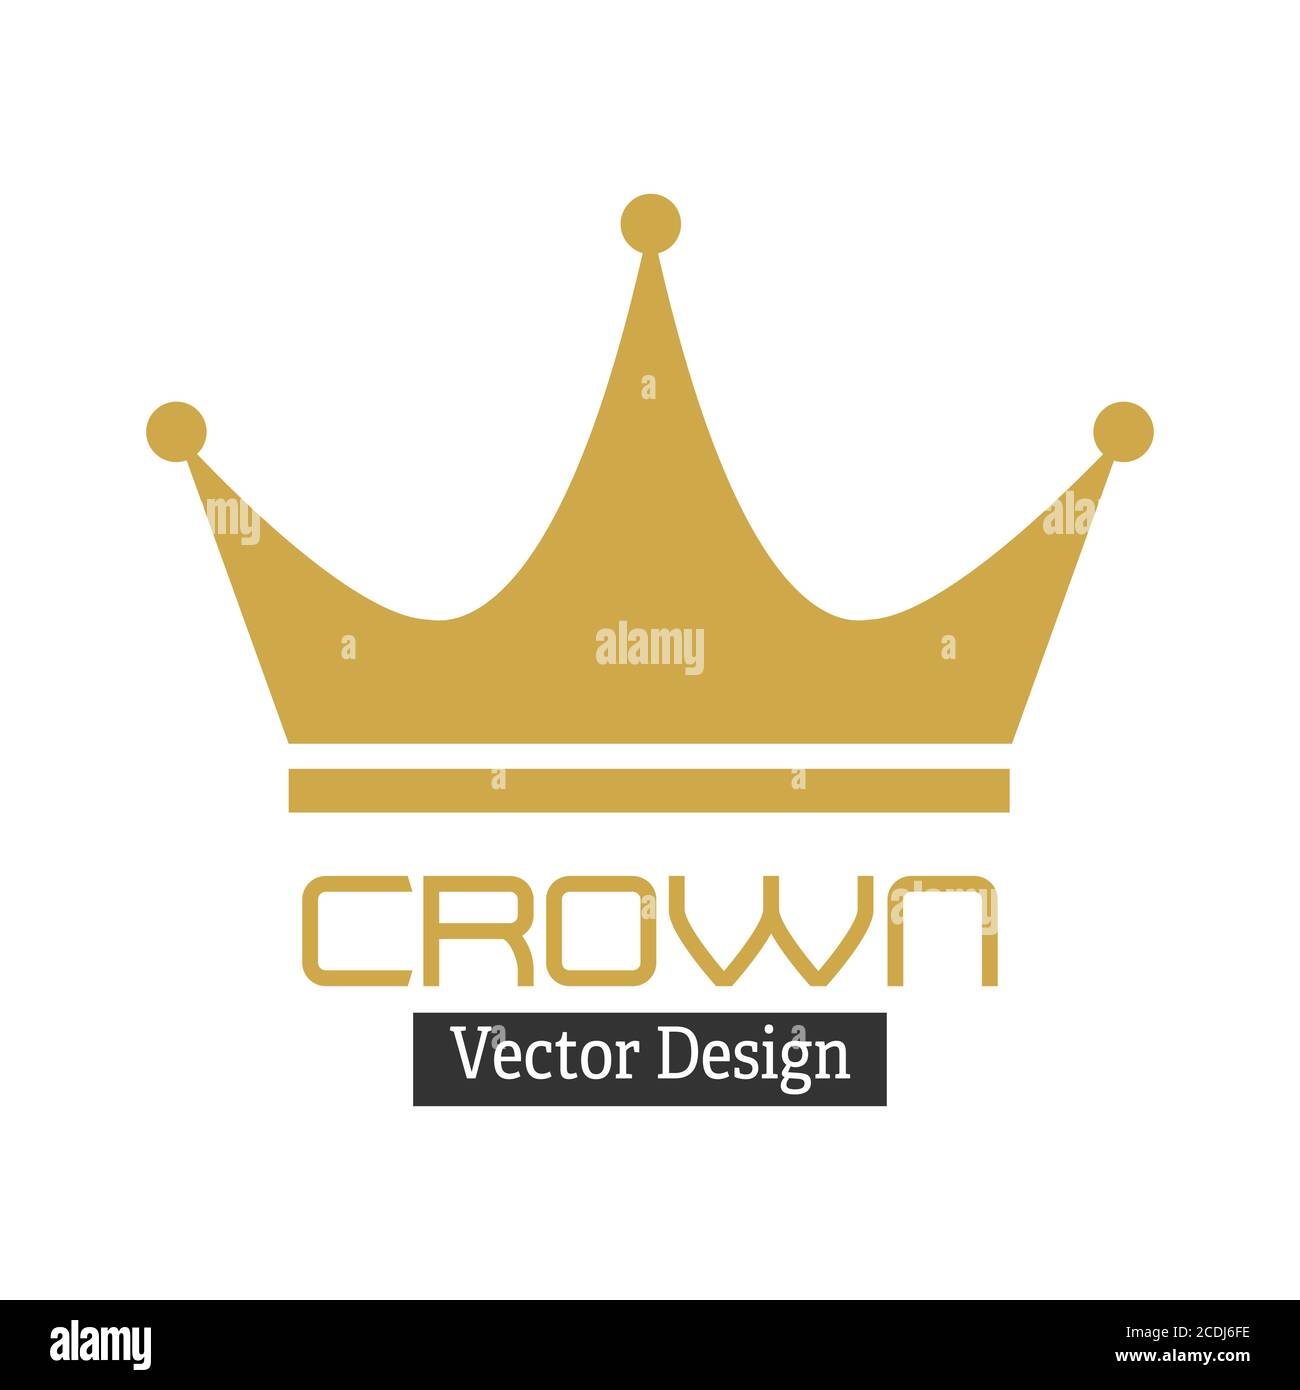 Сrown. Simple vector illustration for logo, sticker, logo or creative design isolated on white background Stock Vector